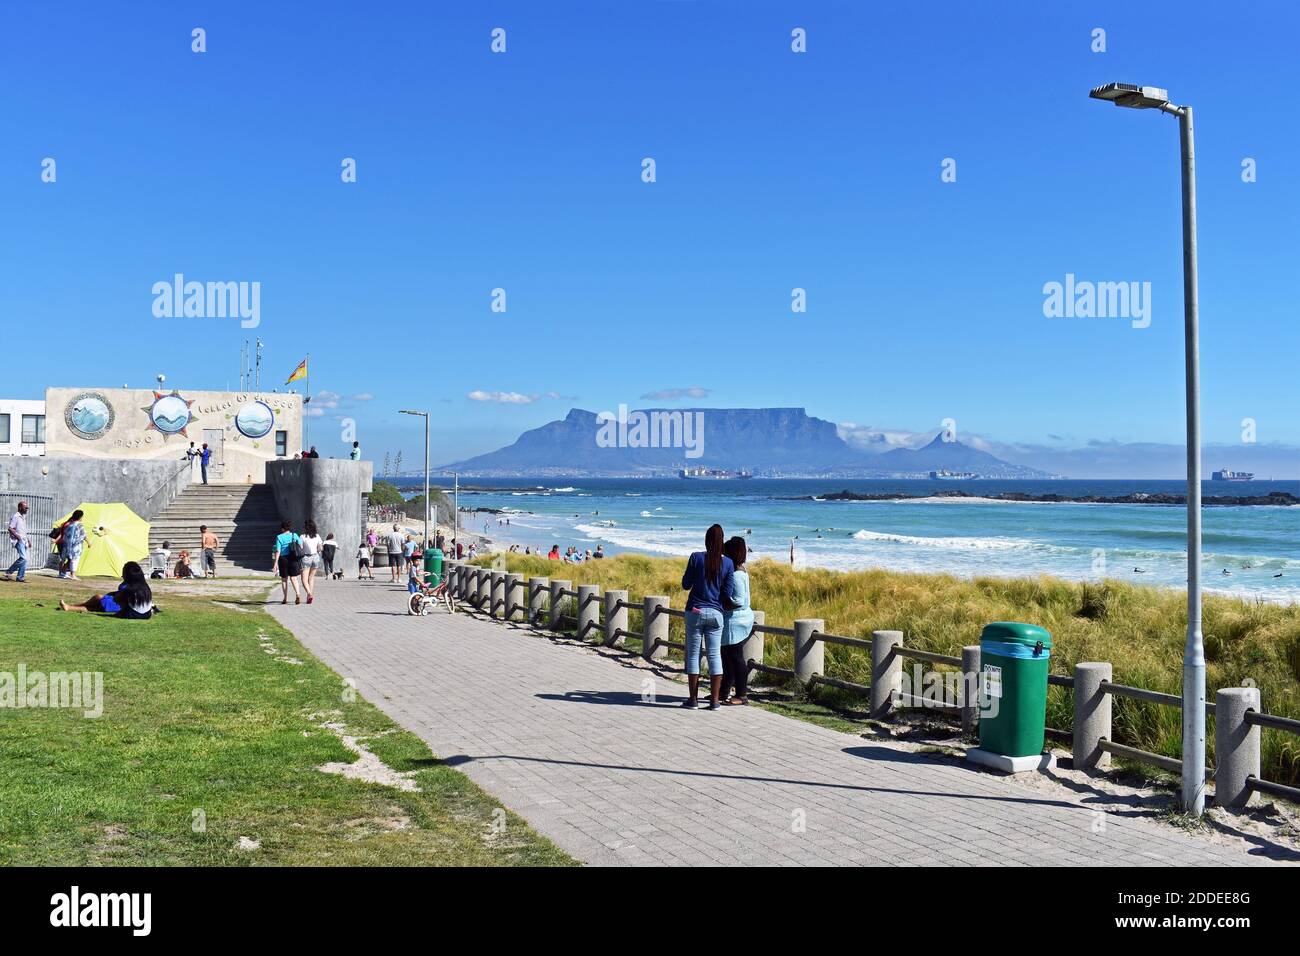 Table Mountain, Devils Peak & Lions Head seen from Bloubergstrand Beach across Table Bay. People walk along the beachside path and sit on the grass. Stock Photo